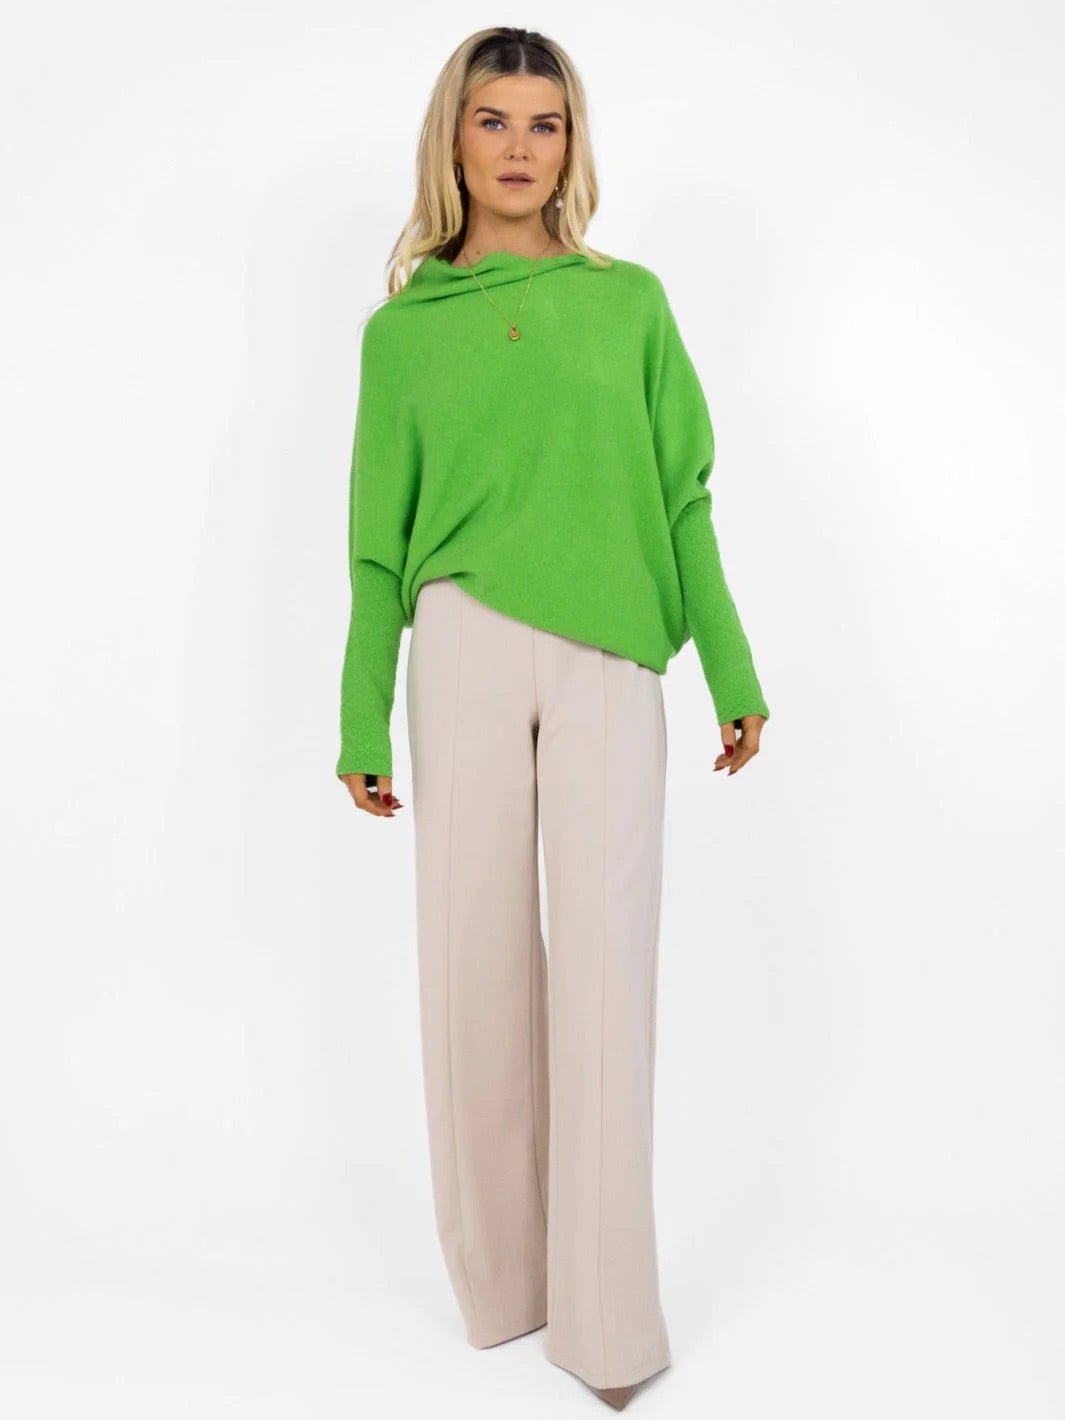 Kate & Pippa Windsor Knit Jumper In Lime Green - Crabtree Cottage